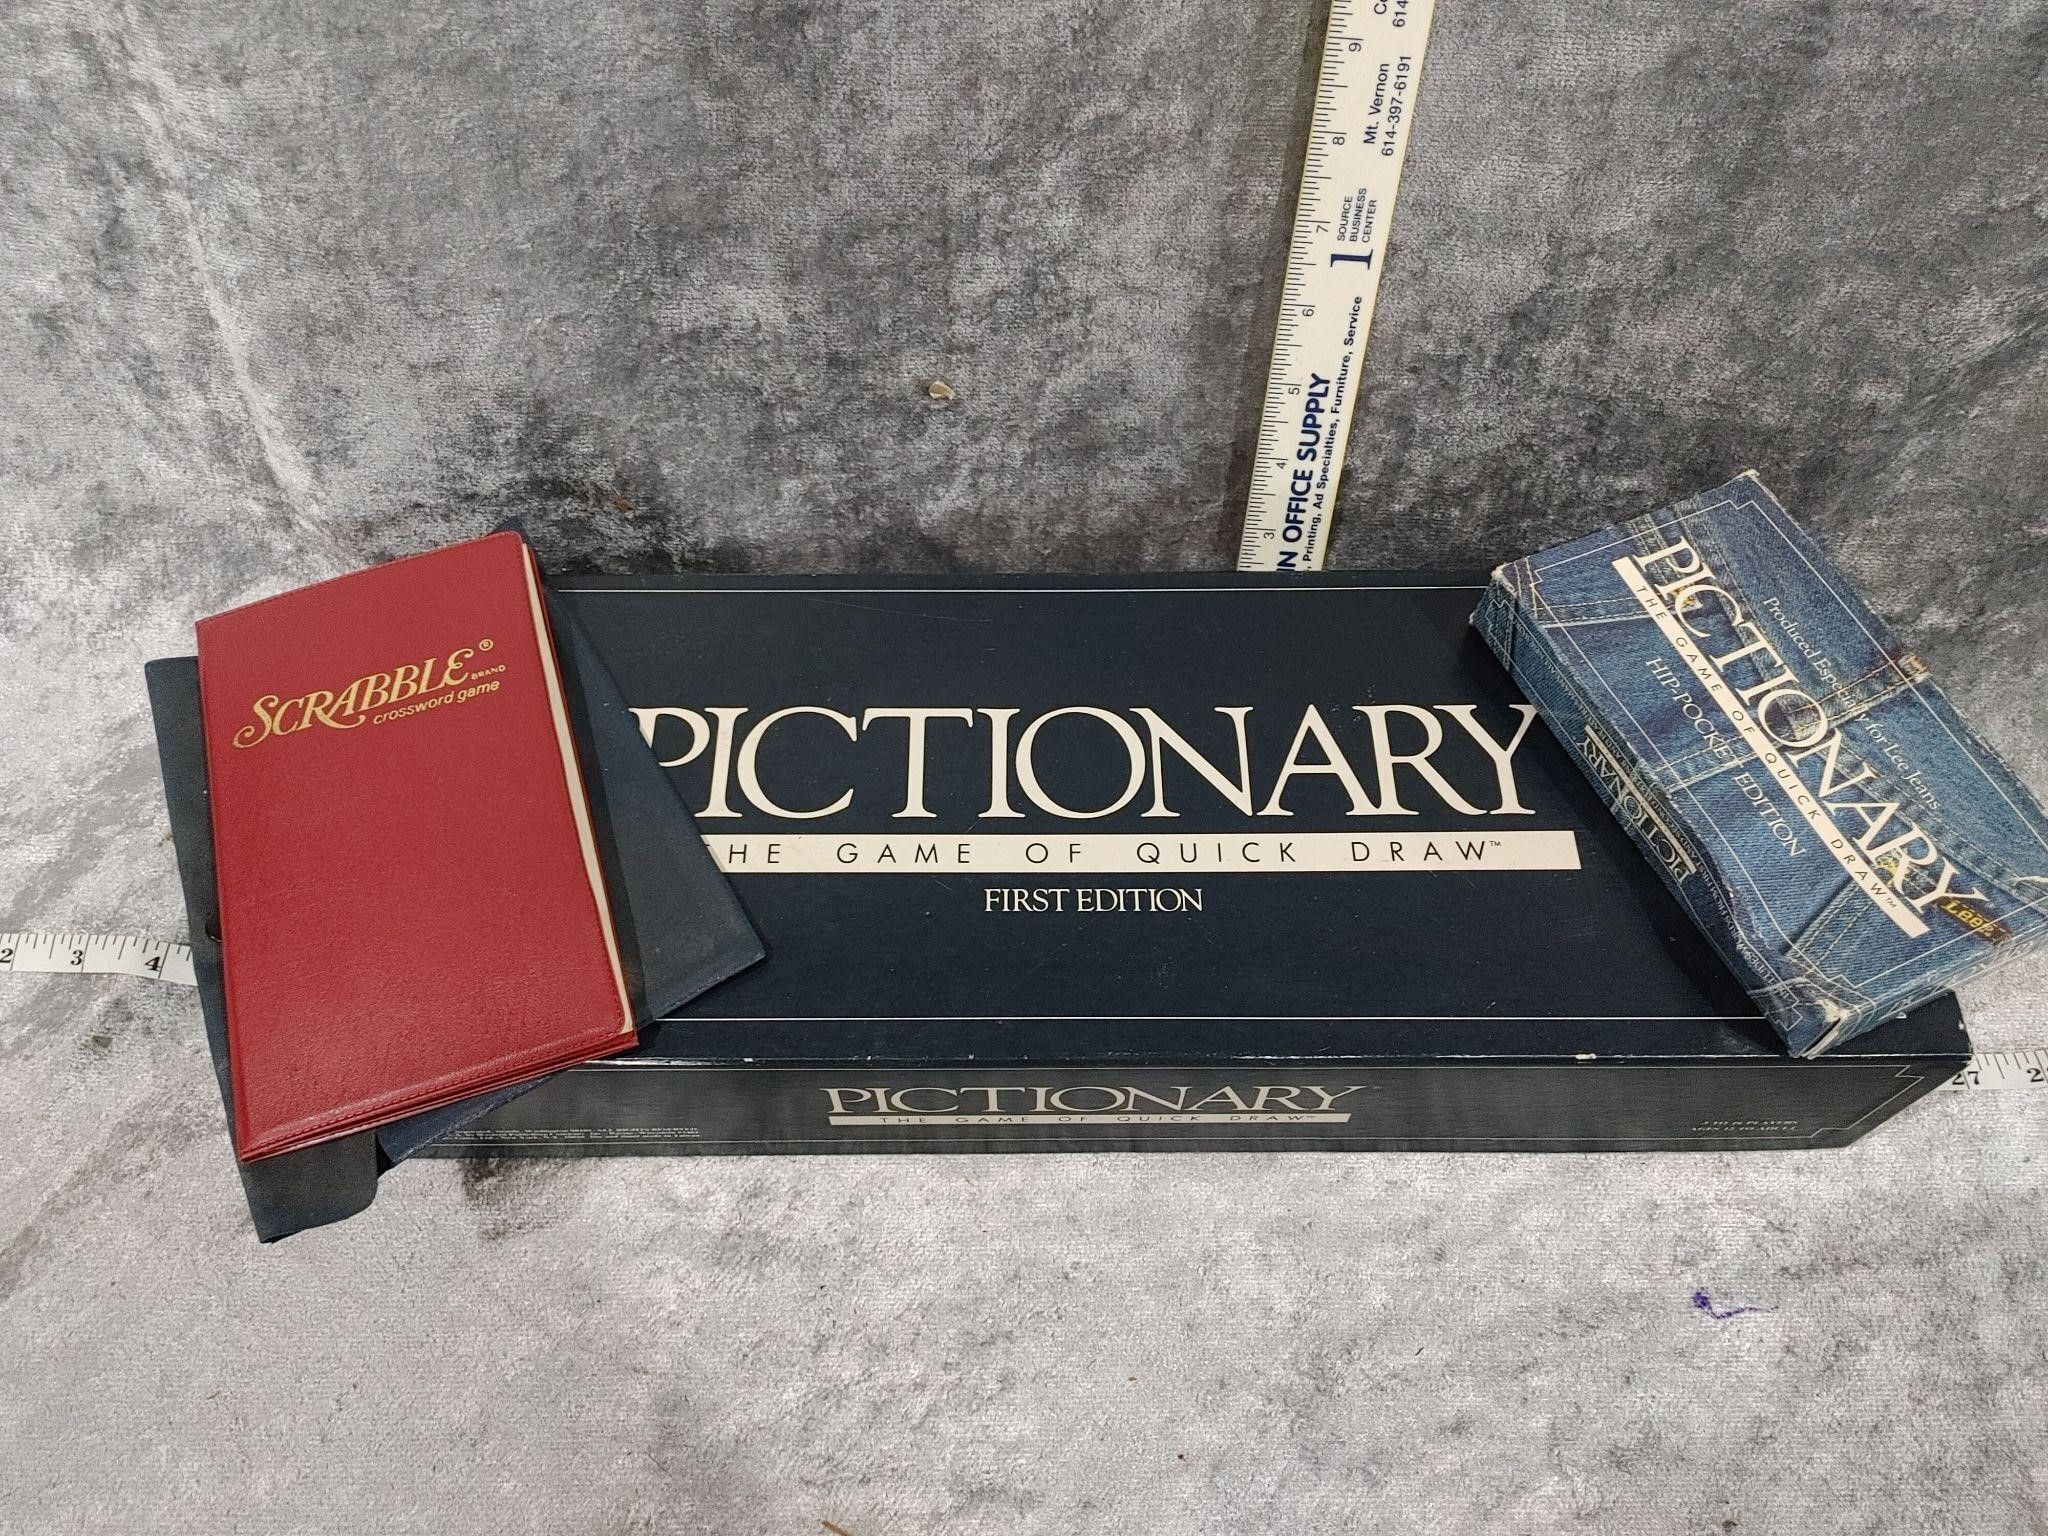 Pictionary & Scrabble Games